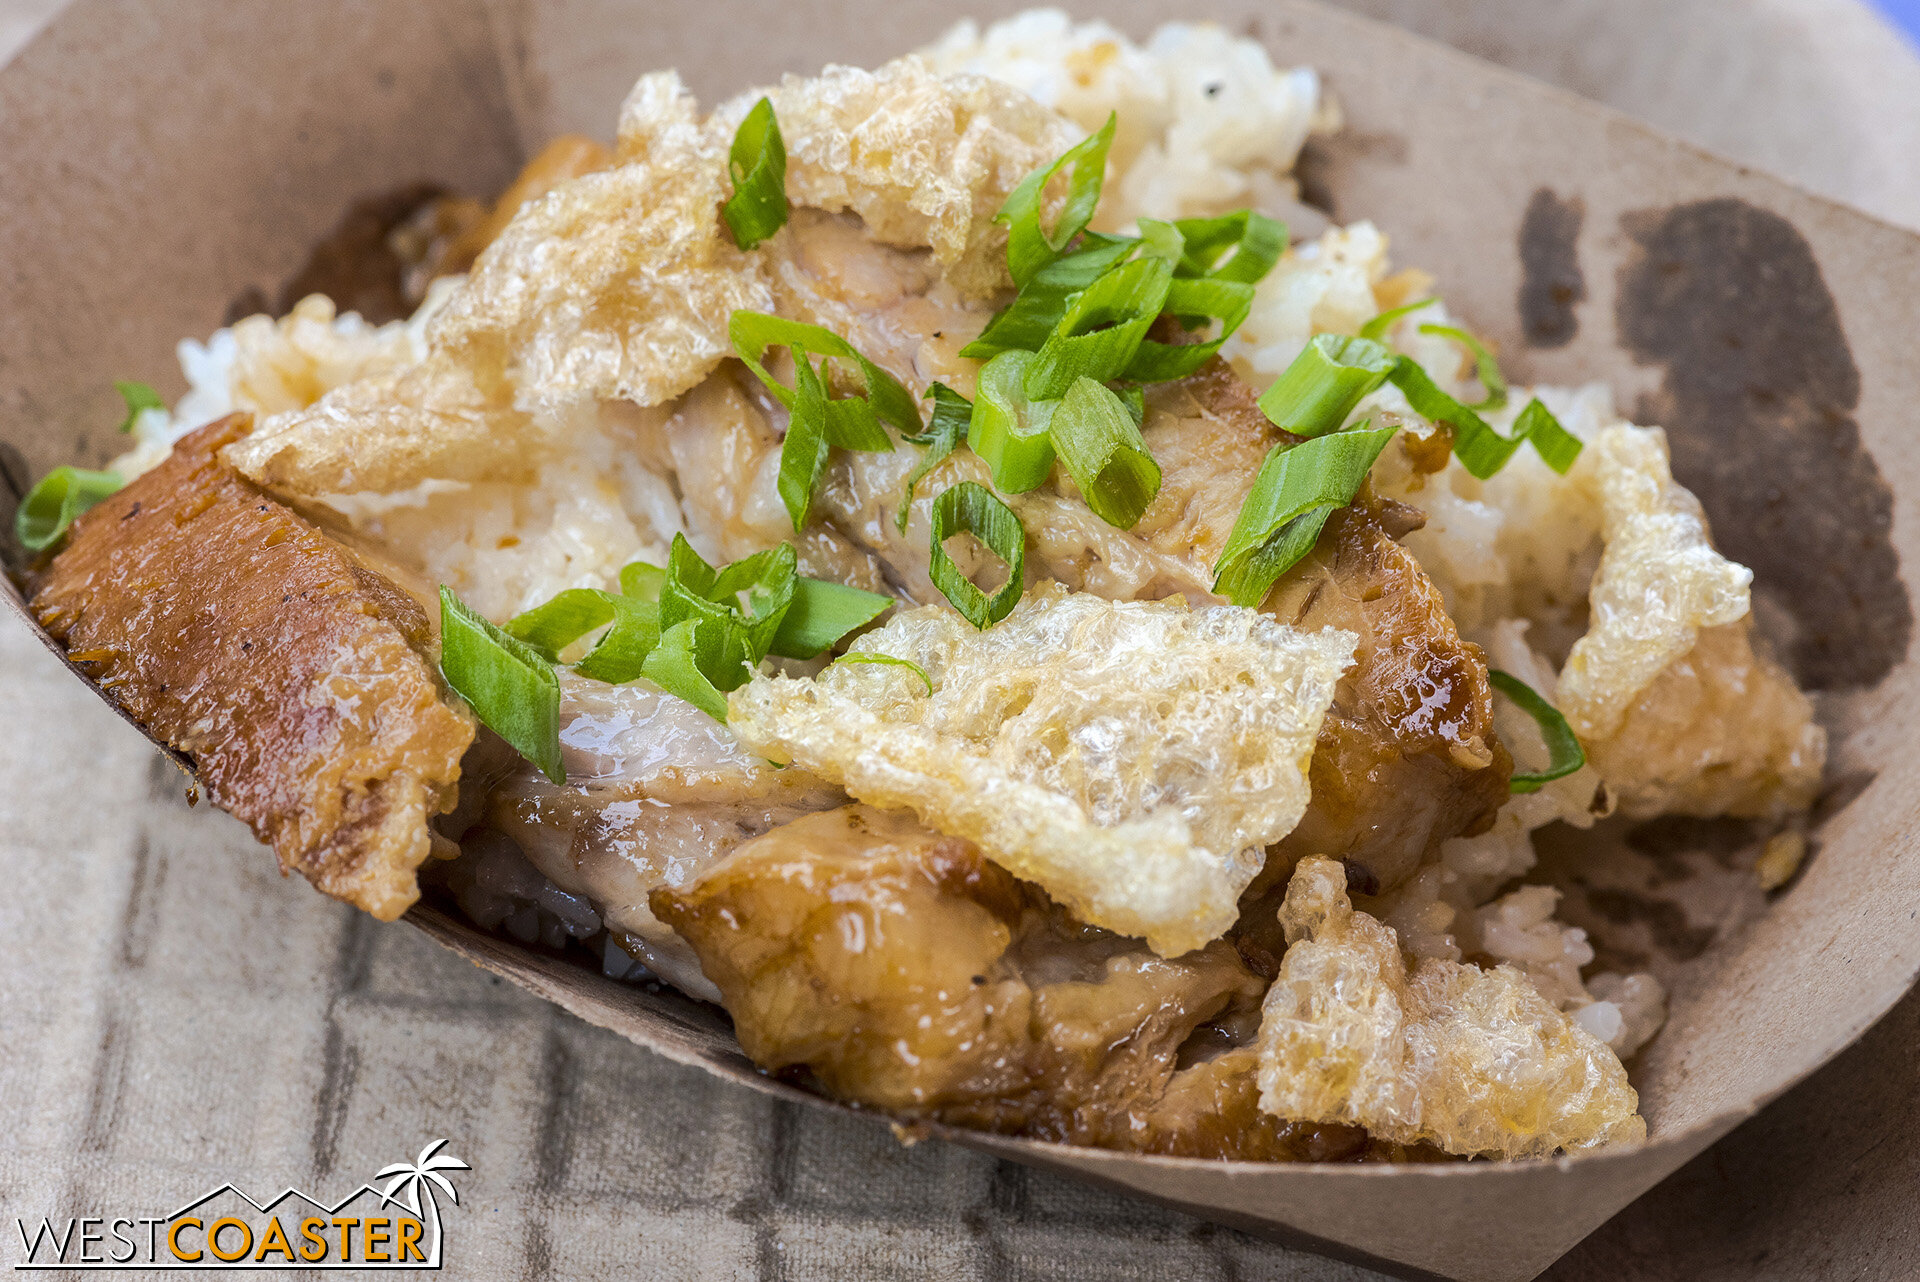  Holiday Duets Marketplace: Braised Pork Belly Adobo – With garlic fried rice  The perennial favorite is back yet again, making it the longest running dish in any of DCA’s food festivals.  I still love it.  The umami flavor is deep, and the garlic in